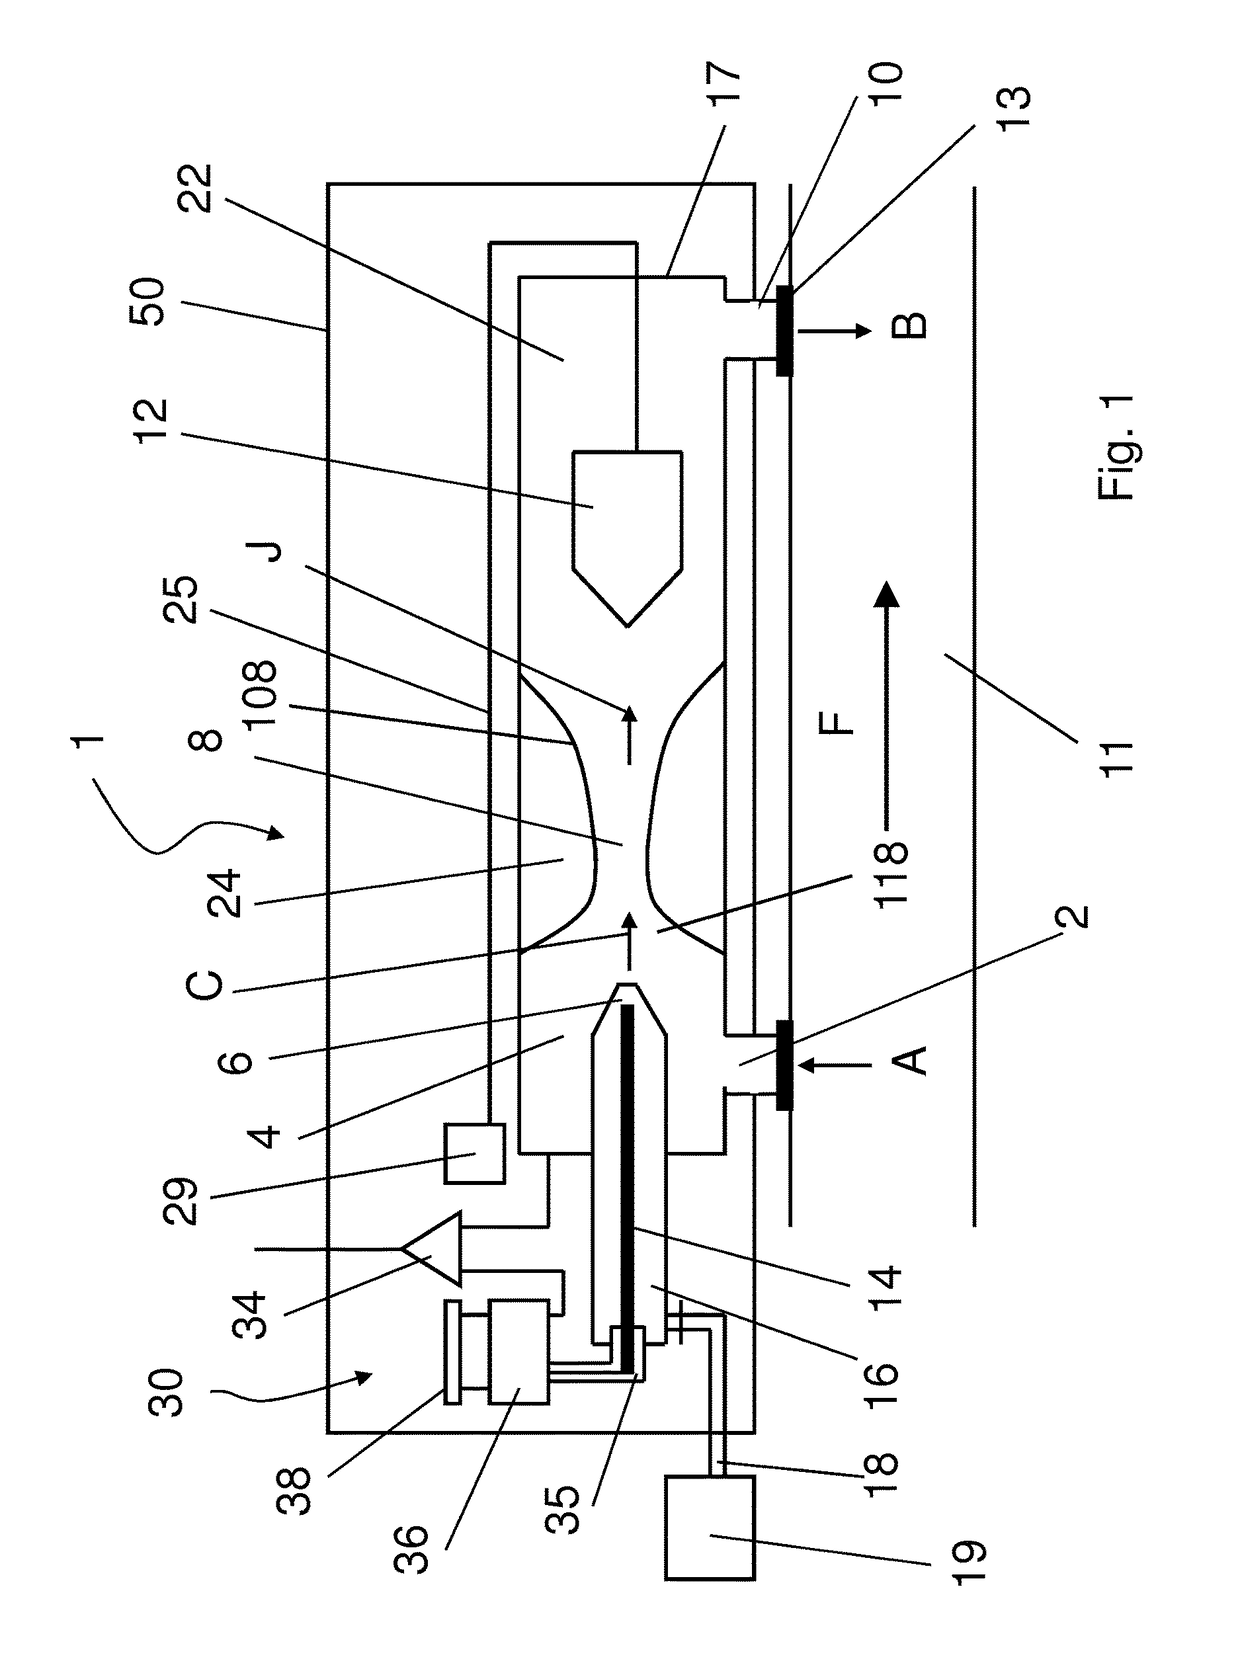 Apparatus for monitoring particles in an aerosol